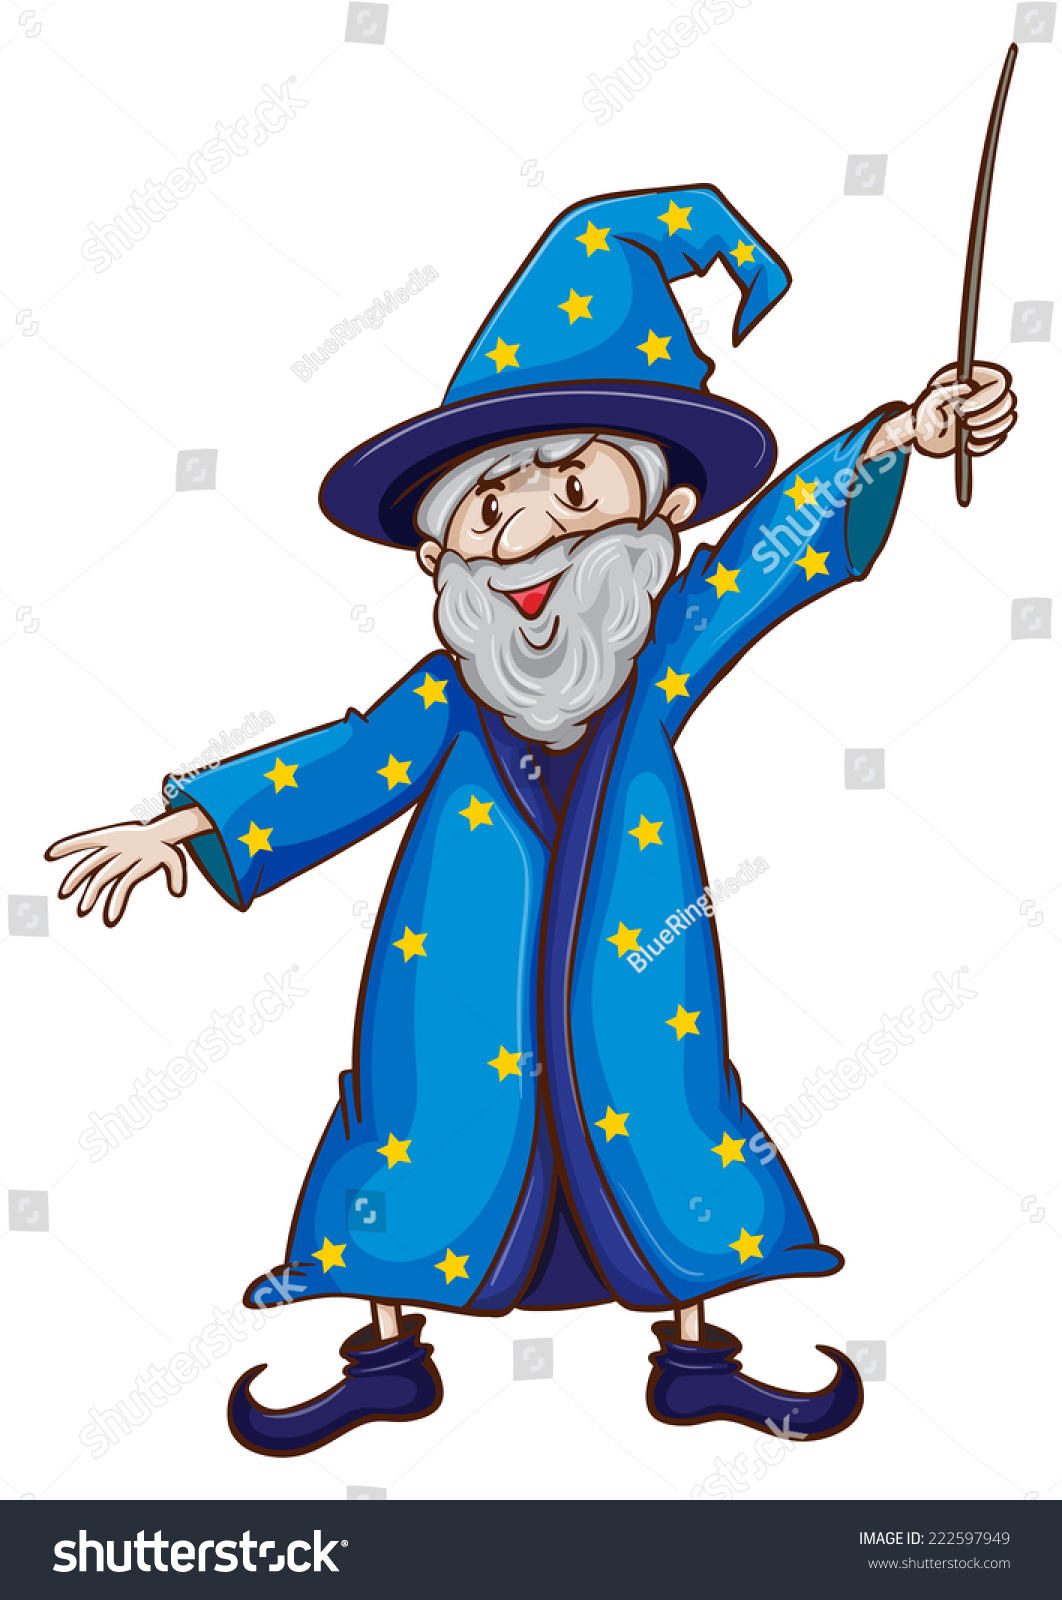 Illustration Close Wizard Wand Stock Vector (Royalty Free) 222597949